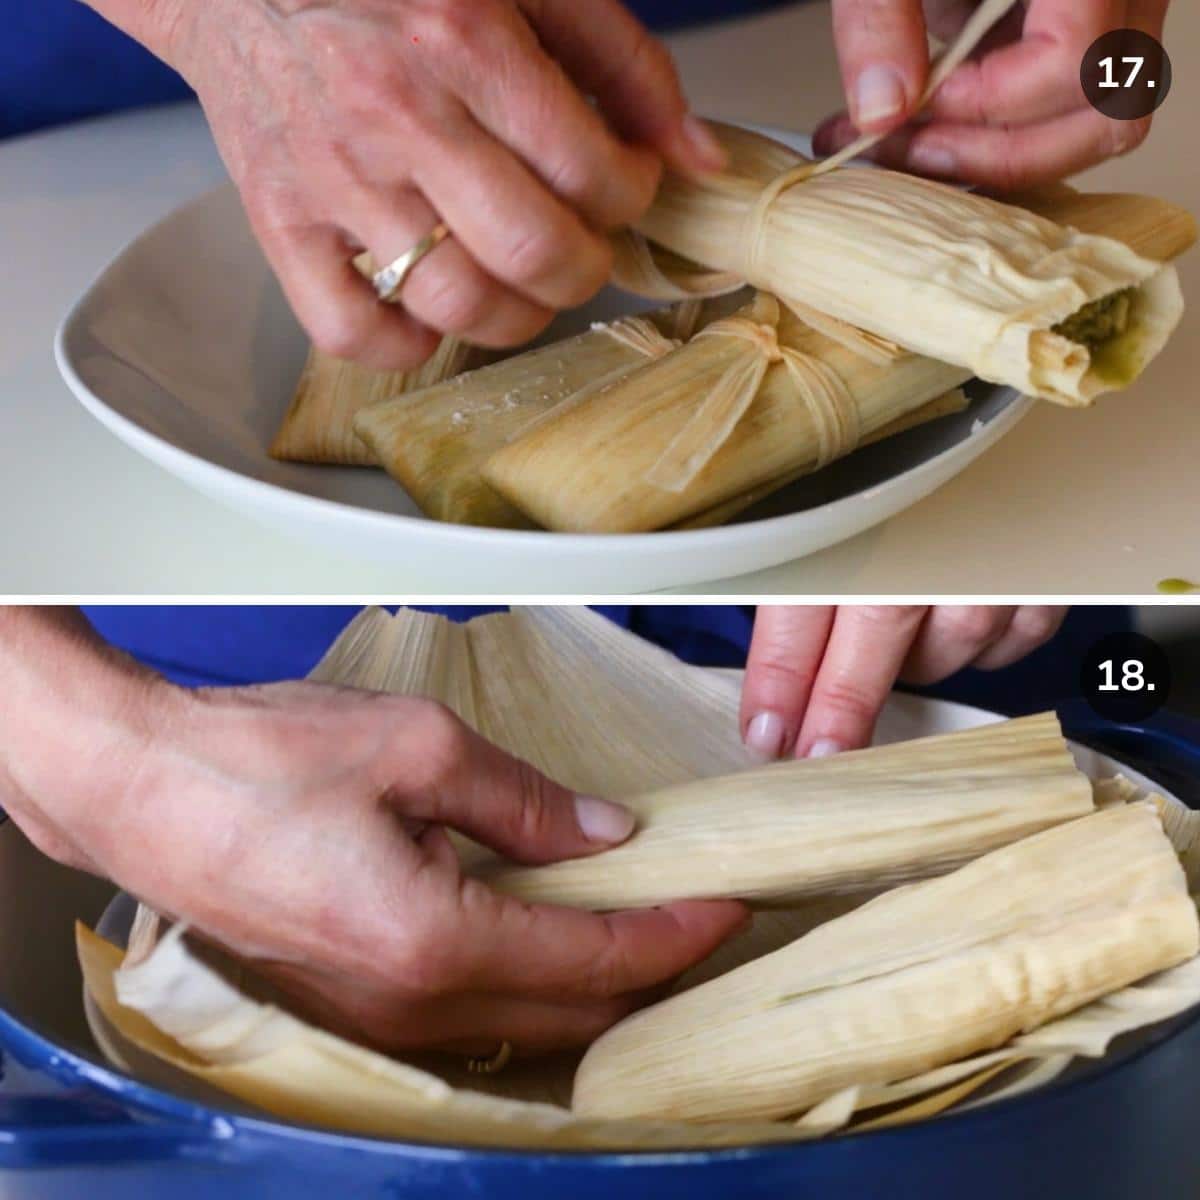 Tying up the tamales with a corn husk bow. Then placing them into a prepared steamer pot. 